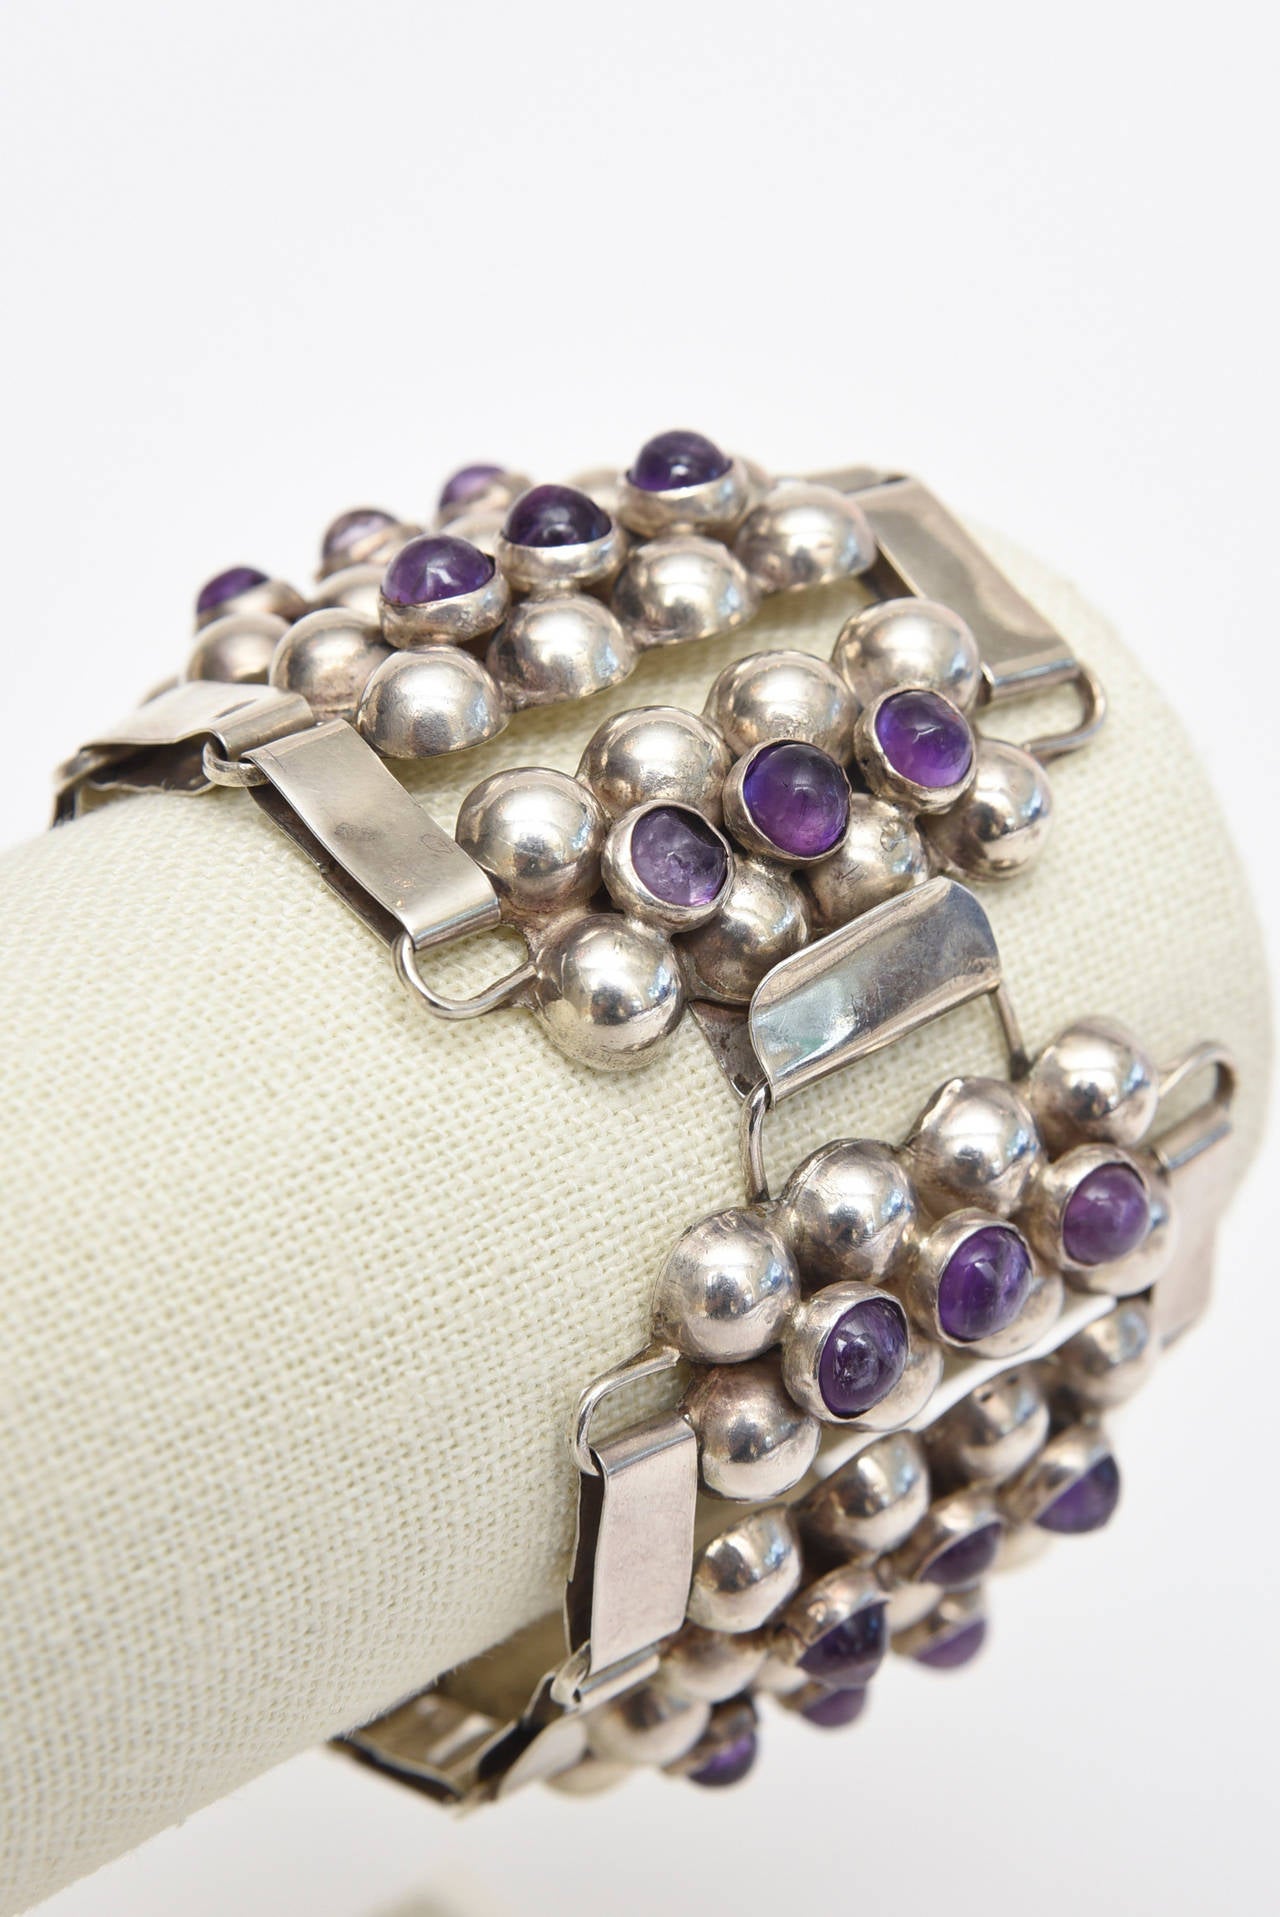  Sterling Silver & Amethyst Cuff Bracelet Mid Century Modern In Good Condition For Sale In North Miami, FL